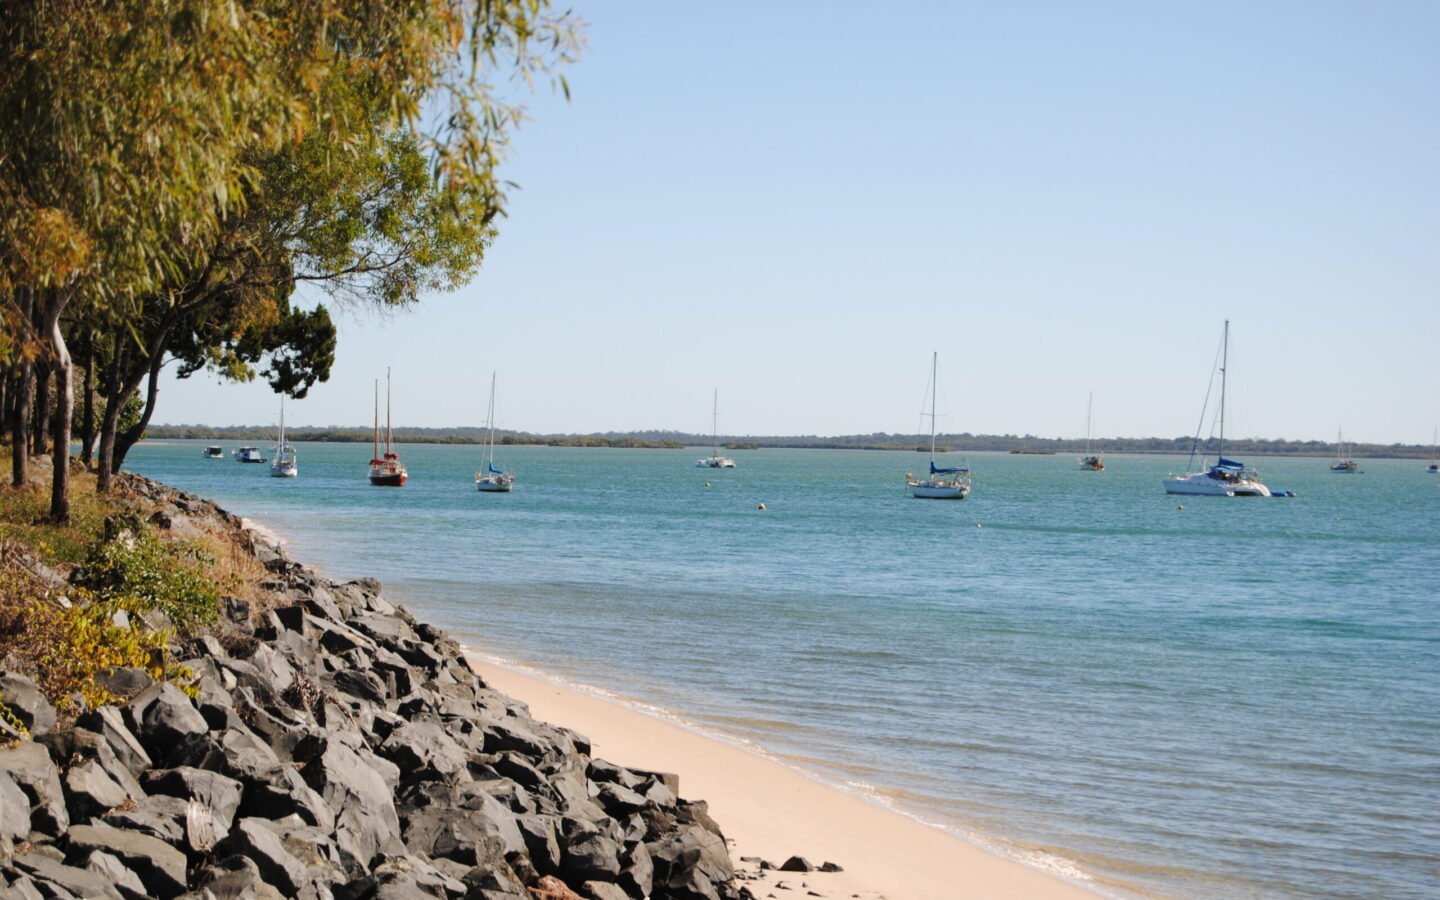 Burrum Heads view of boats on shore